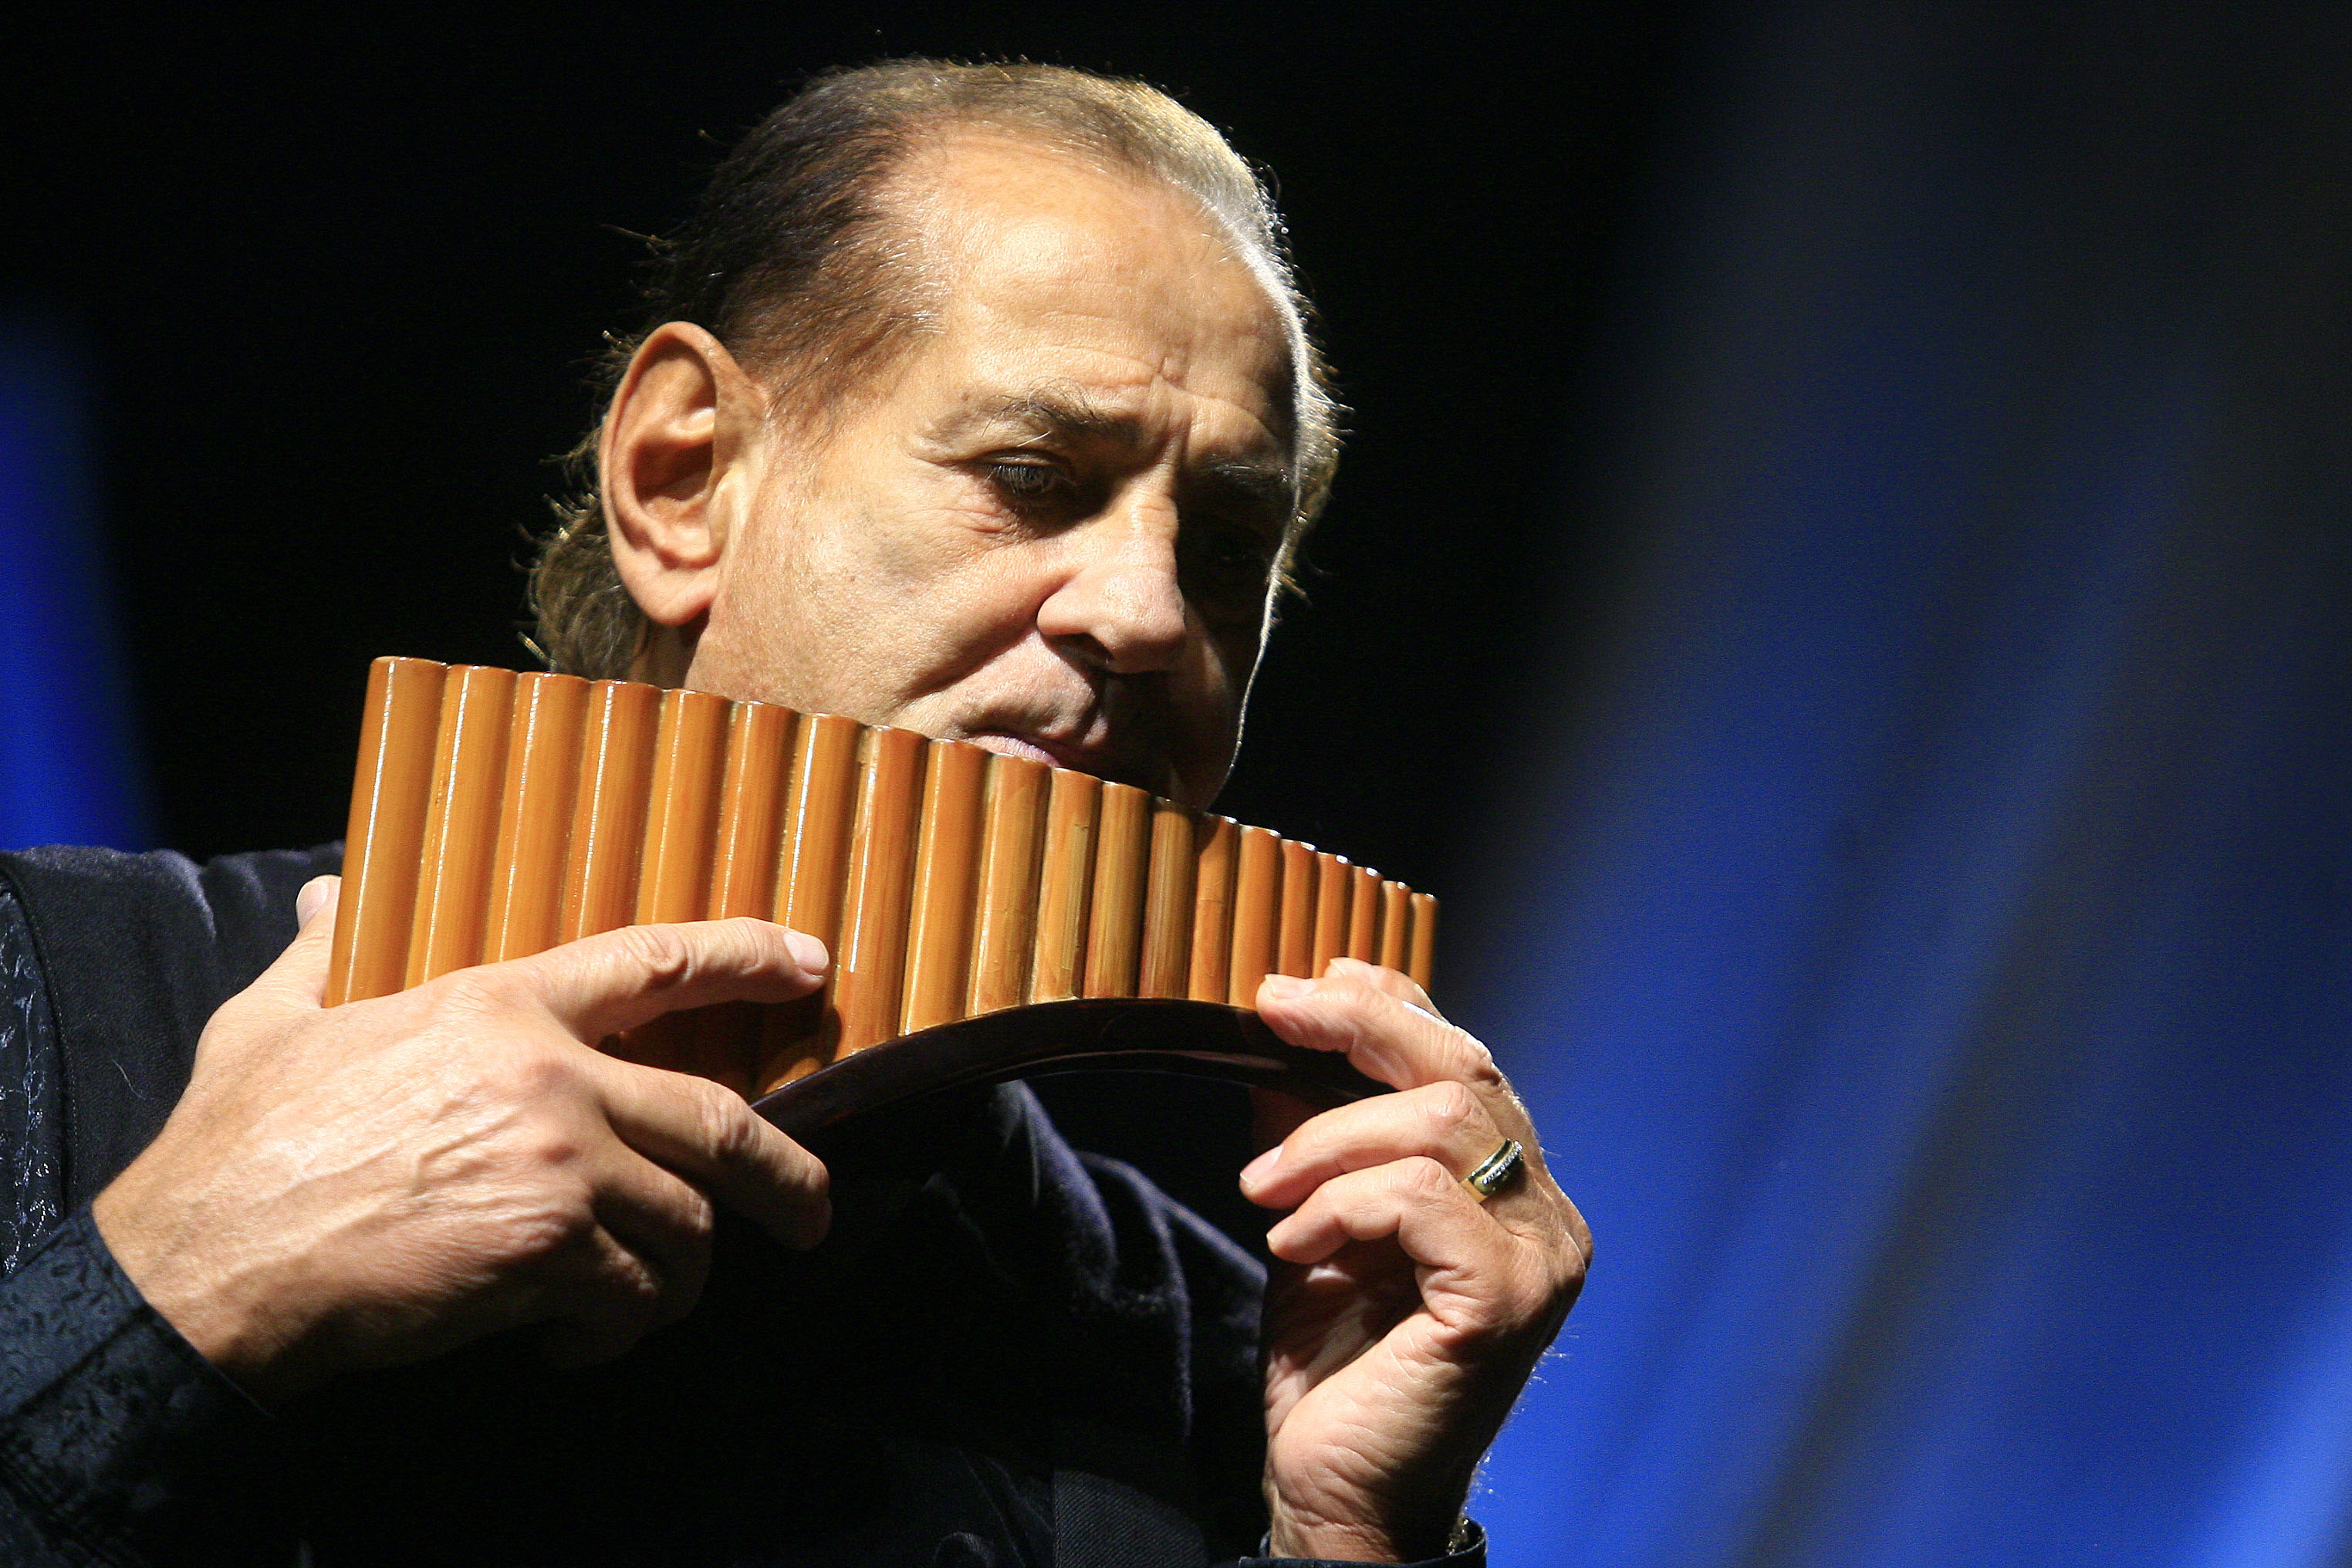 Why Not Take a Rest of Mind With a Pan Flute?